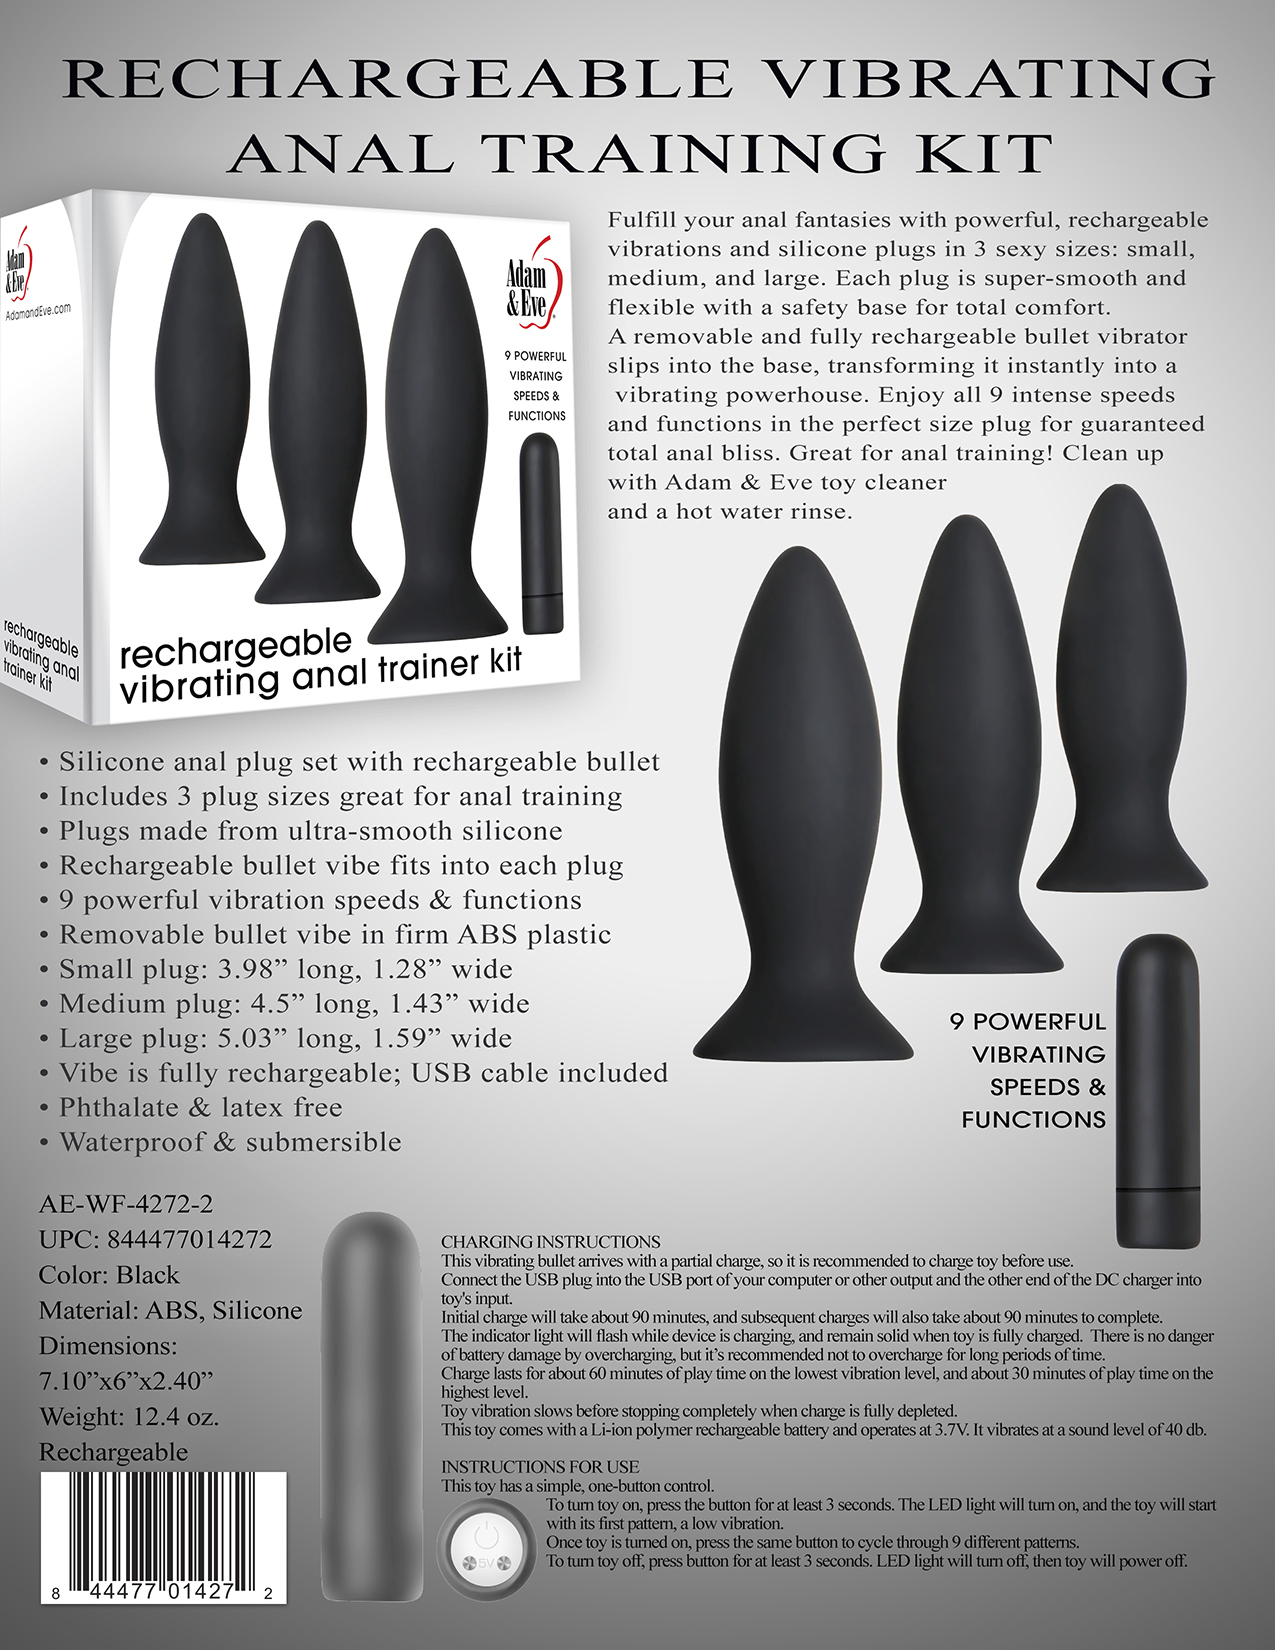 RECHARGEABLE-VIBRATING-ANAL-TRAINER-KIT-back.jpg